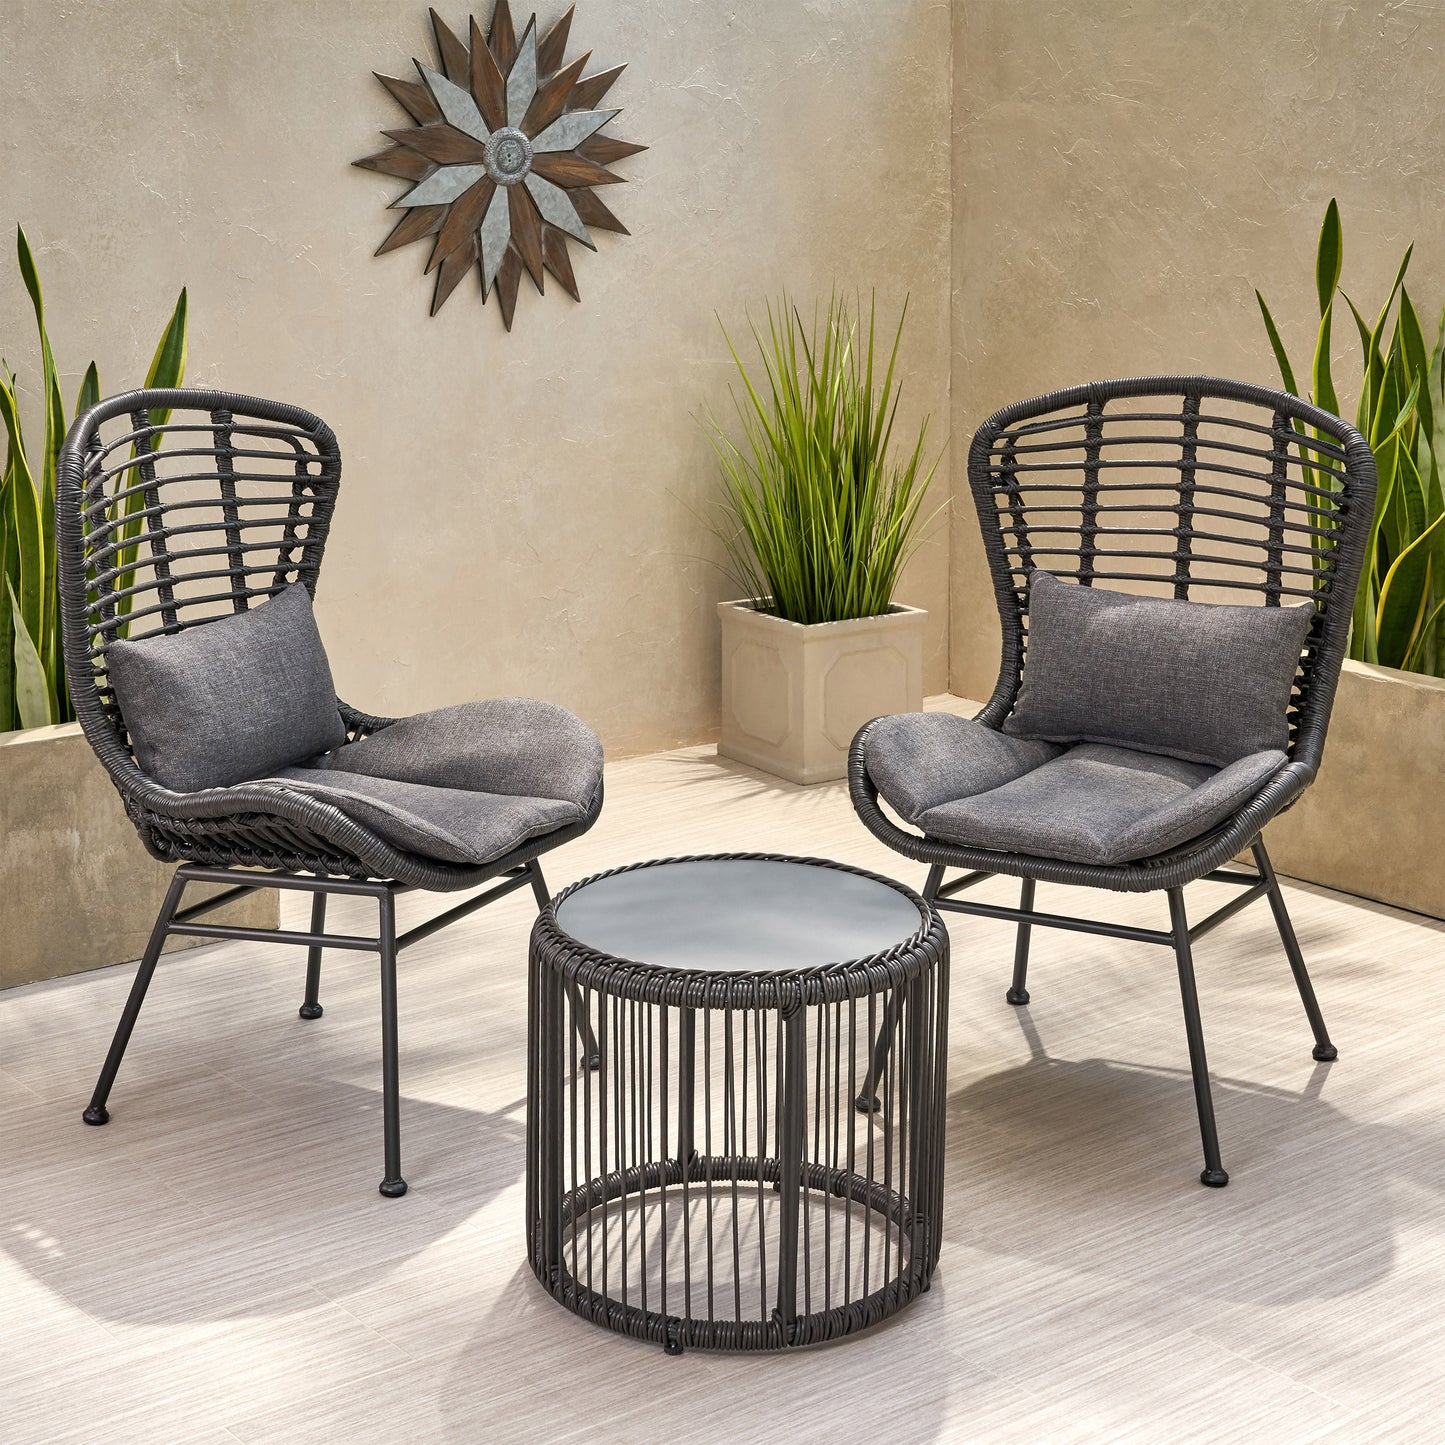 Keslynn Outdoor Modern Boho 2 Seater Wicker Chat Set with Side Table